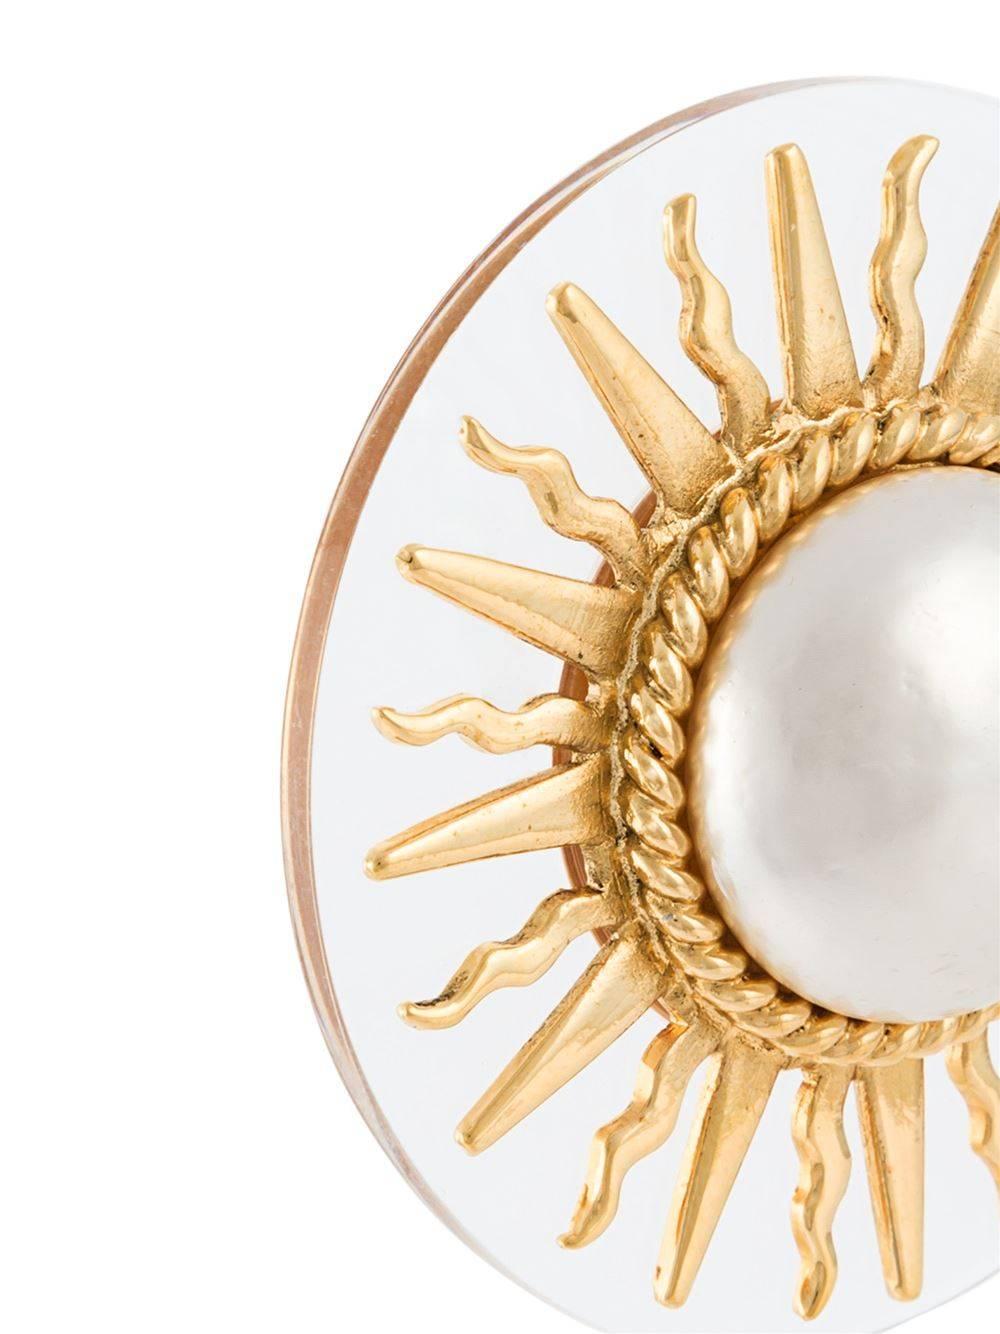 Gold-tone metal and plastic sun clip-on earrings featuring a faux pearl centre. 

Colour: Gold-tone

Material: Plastic 100% / Metal (Other) 100%

Measurements: W: 5cm, L: 5cm

Condition: 8 out of 10
Very good